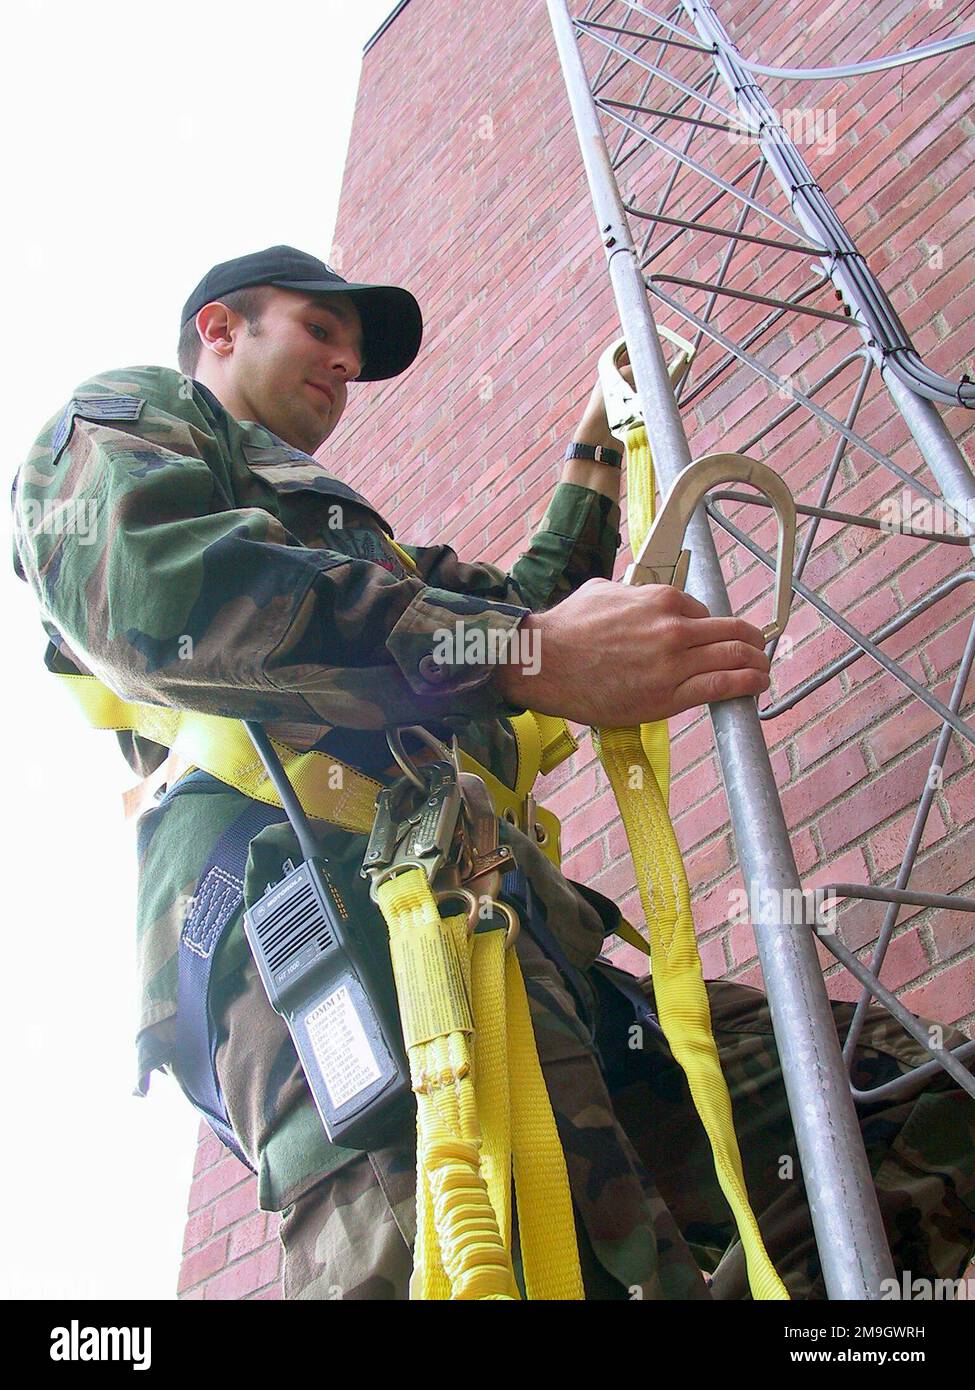 STAFF Sergeant Bryan Druar, USAF, 148th Communications Flight, Duluth Air National Guard, Duluth International Airport, Minnesota, conducts a final check of his personal safety equipment prior to climbing a communications tower at the Wing. It is part of a plan, after their inspection, to replace older structures with an upgrade. Base: Duluth International Airport State: Minnesota (MN) Country: United States Of America (USA) Scene Major Command Shown: ANG Stock Photo